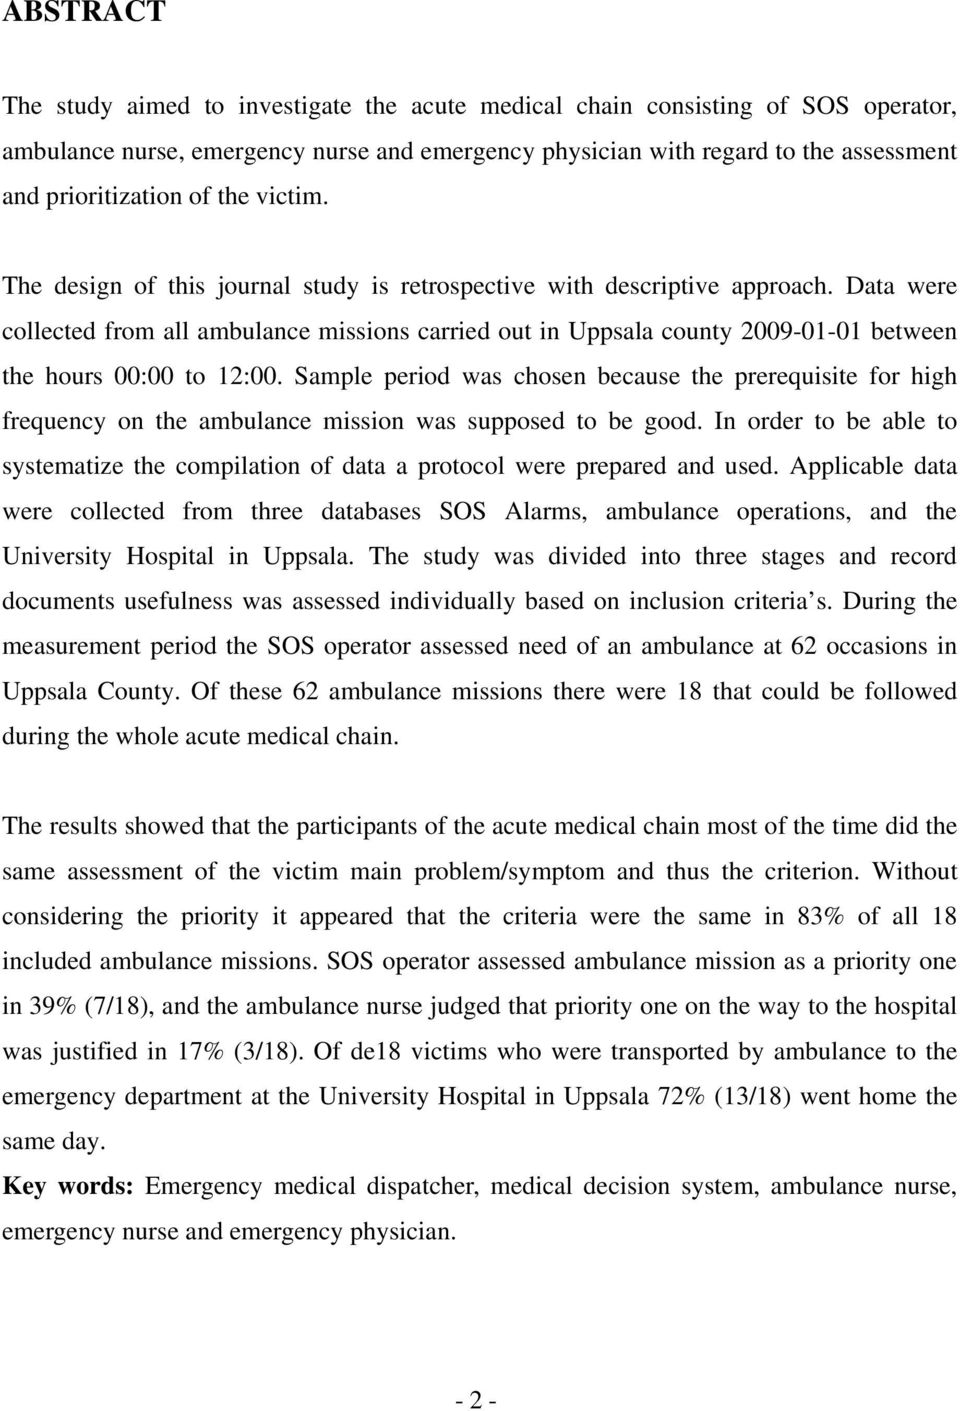 Data were collected from all ambulance missions carried out in Uppsala county 2009-01-01 between the hours 00:00 to 12:00.